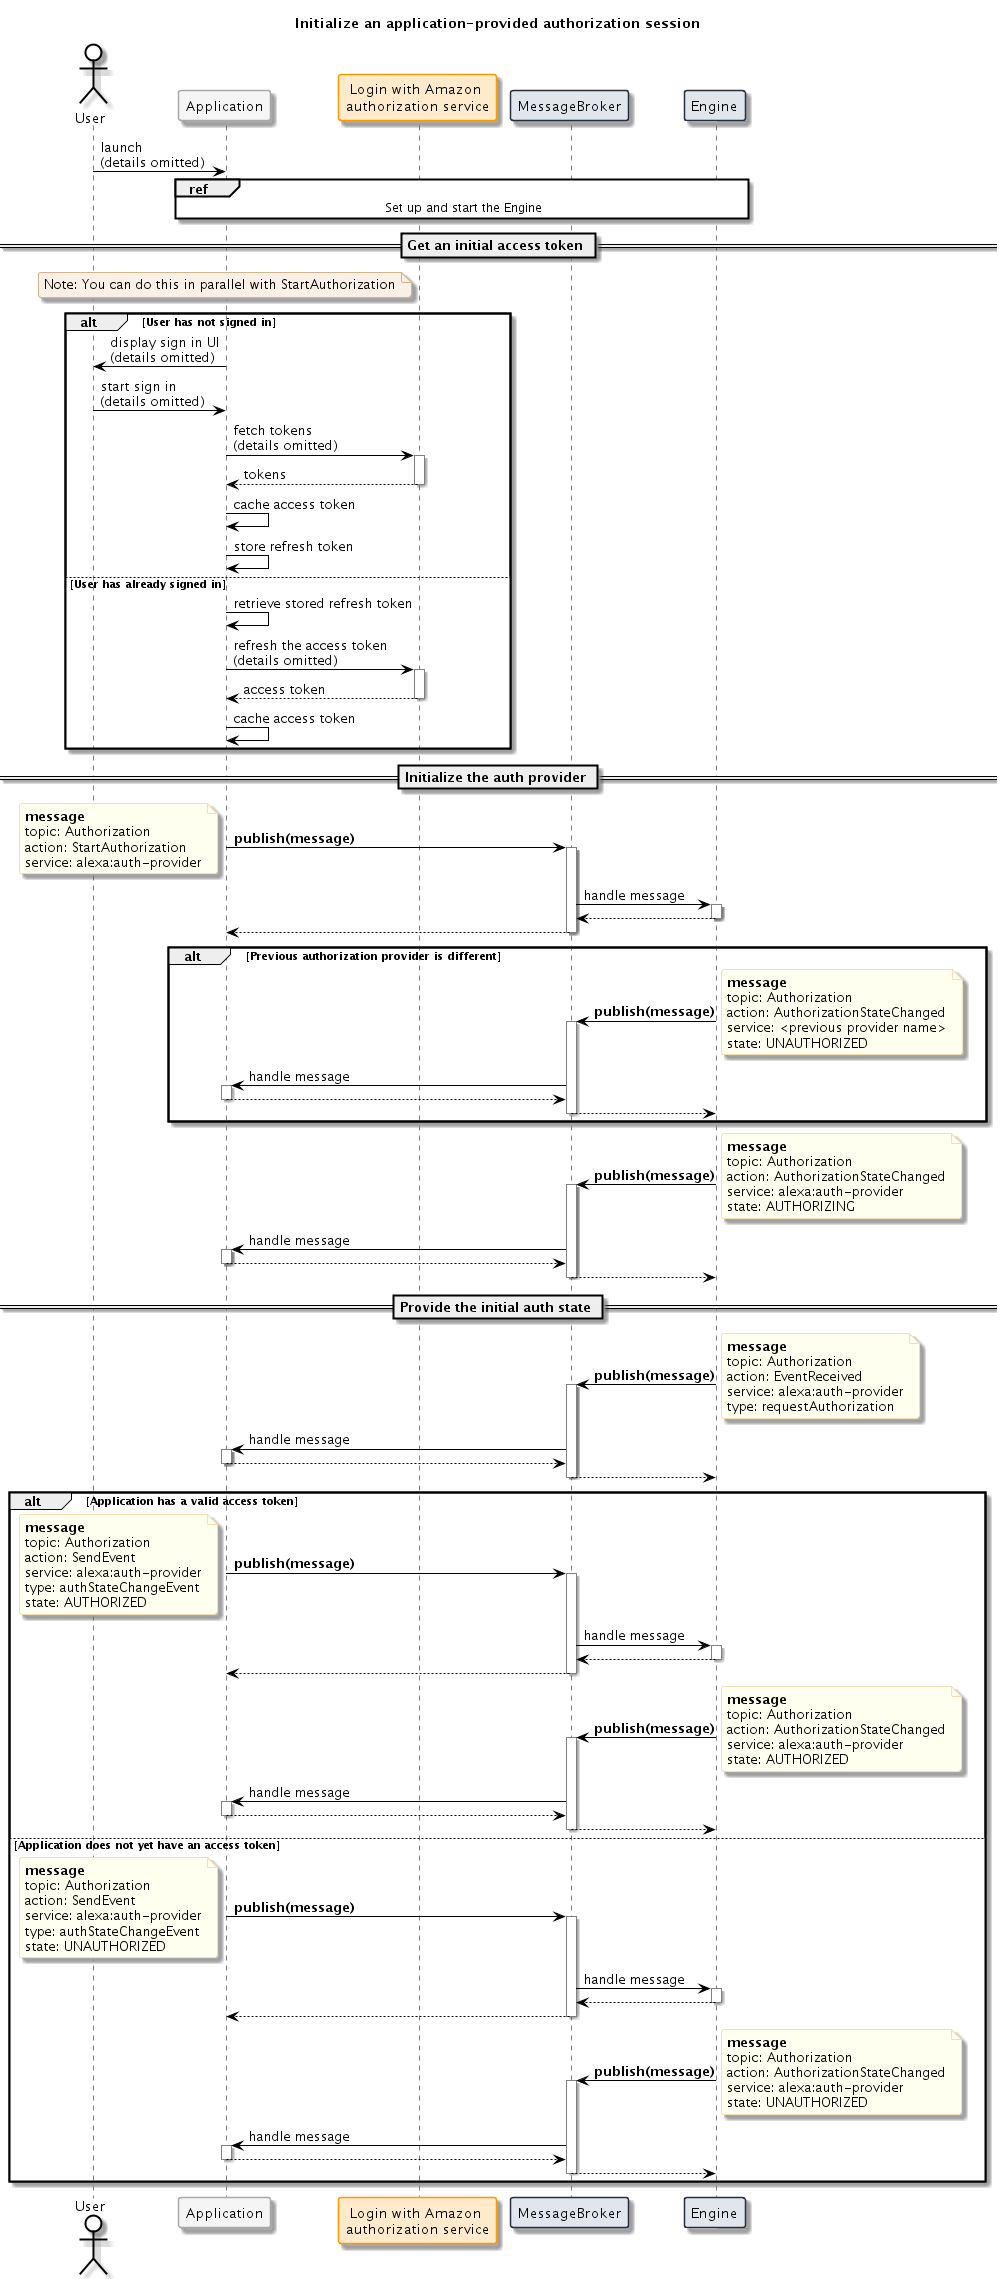 Sequence diagram - Initialize the authorization provider